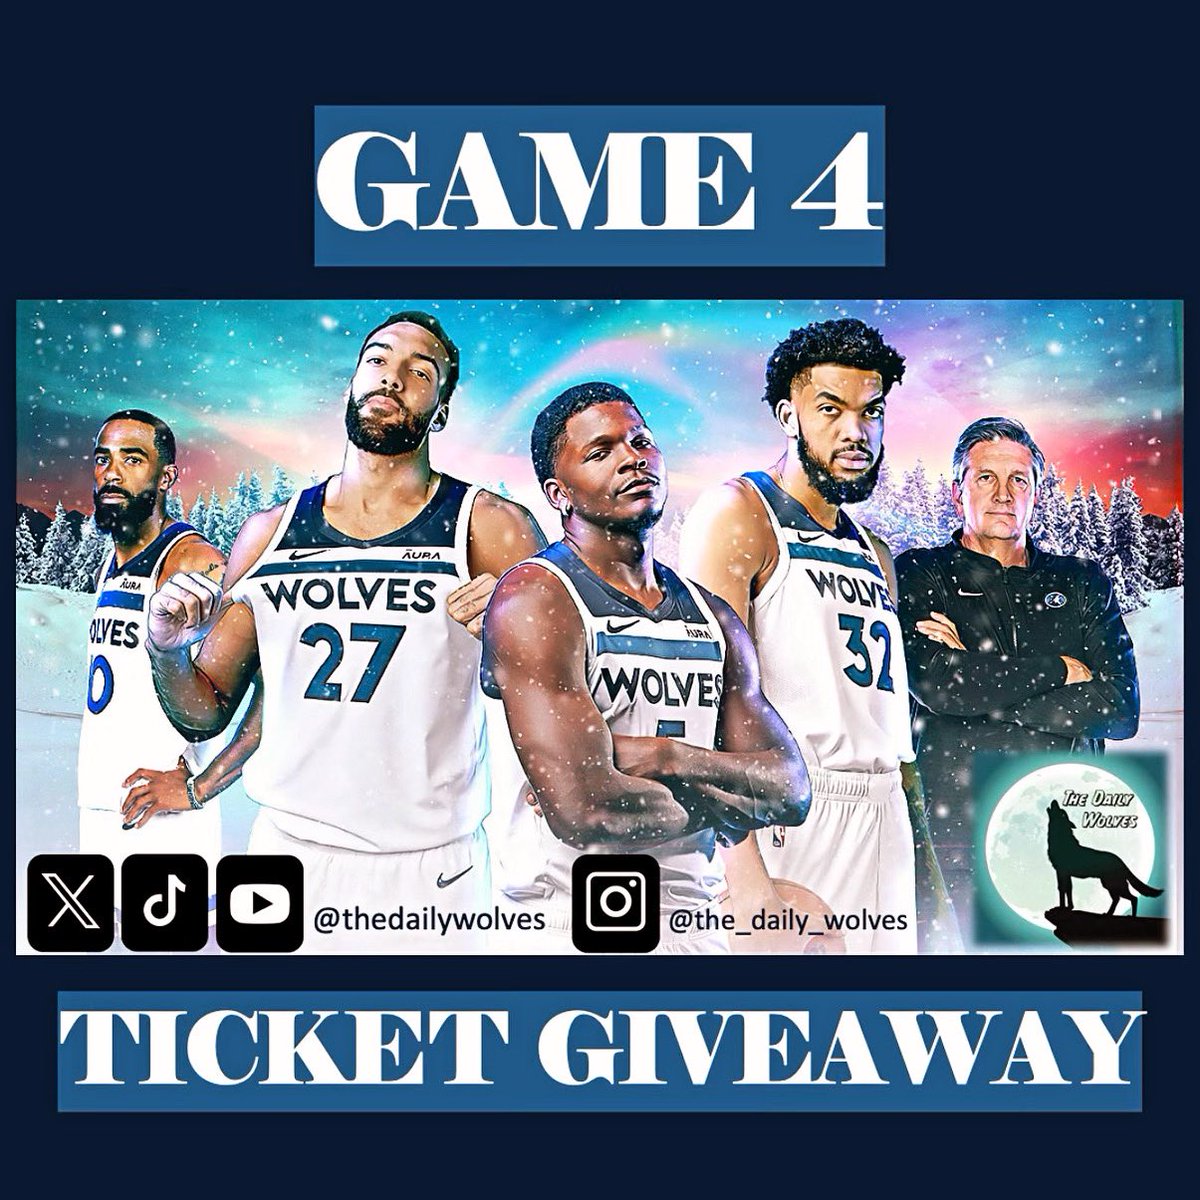 BIGGEST GIVEAWAY YET 🚨 Giving away a couple tickets to the Wolves vs Nuggets Playoff game this Sunday, May 12th at Target Center. You’ll be coming to the game with The Daily Wolves team. HOW TO ENTER: - Must be following - Repost/Like - Tag your plus 1 BONUS ENTRY: -…